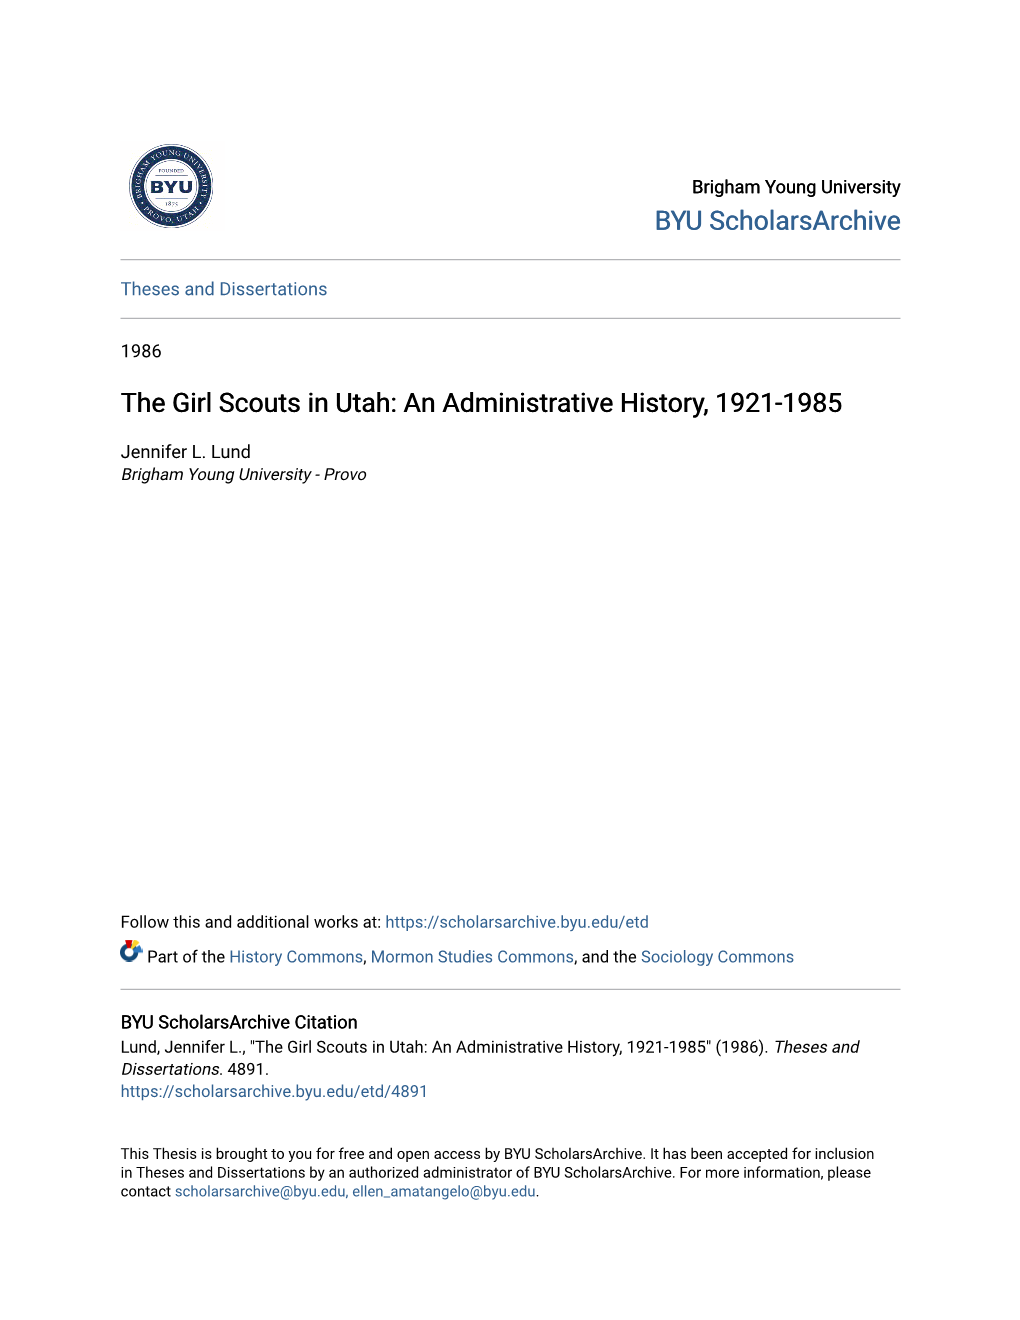 The Girl Scouts in Utah: an Administrative History, 1921-1985